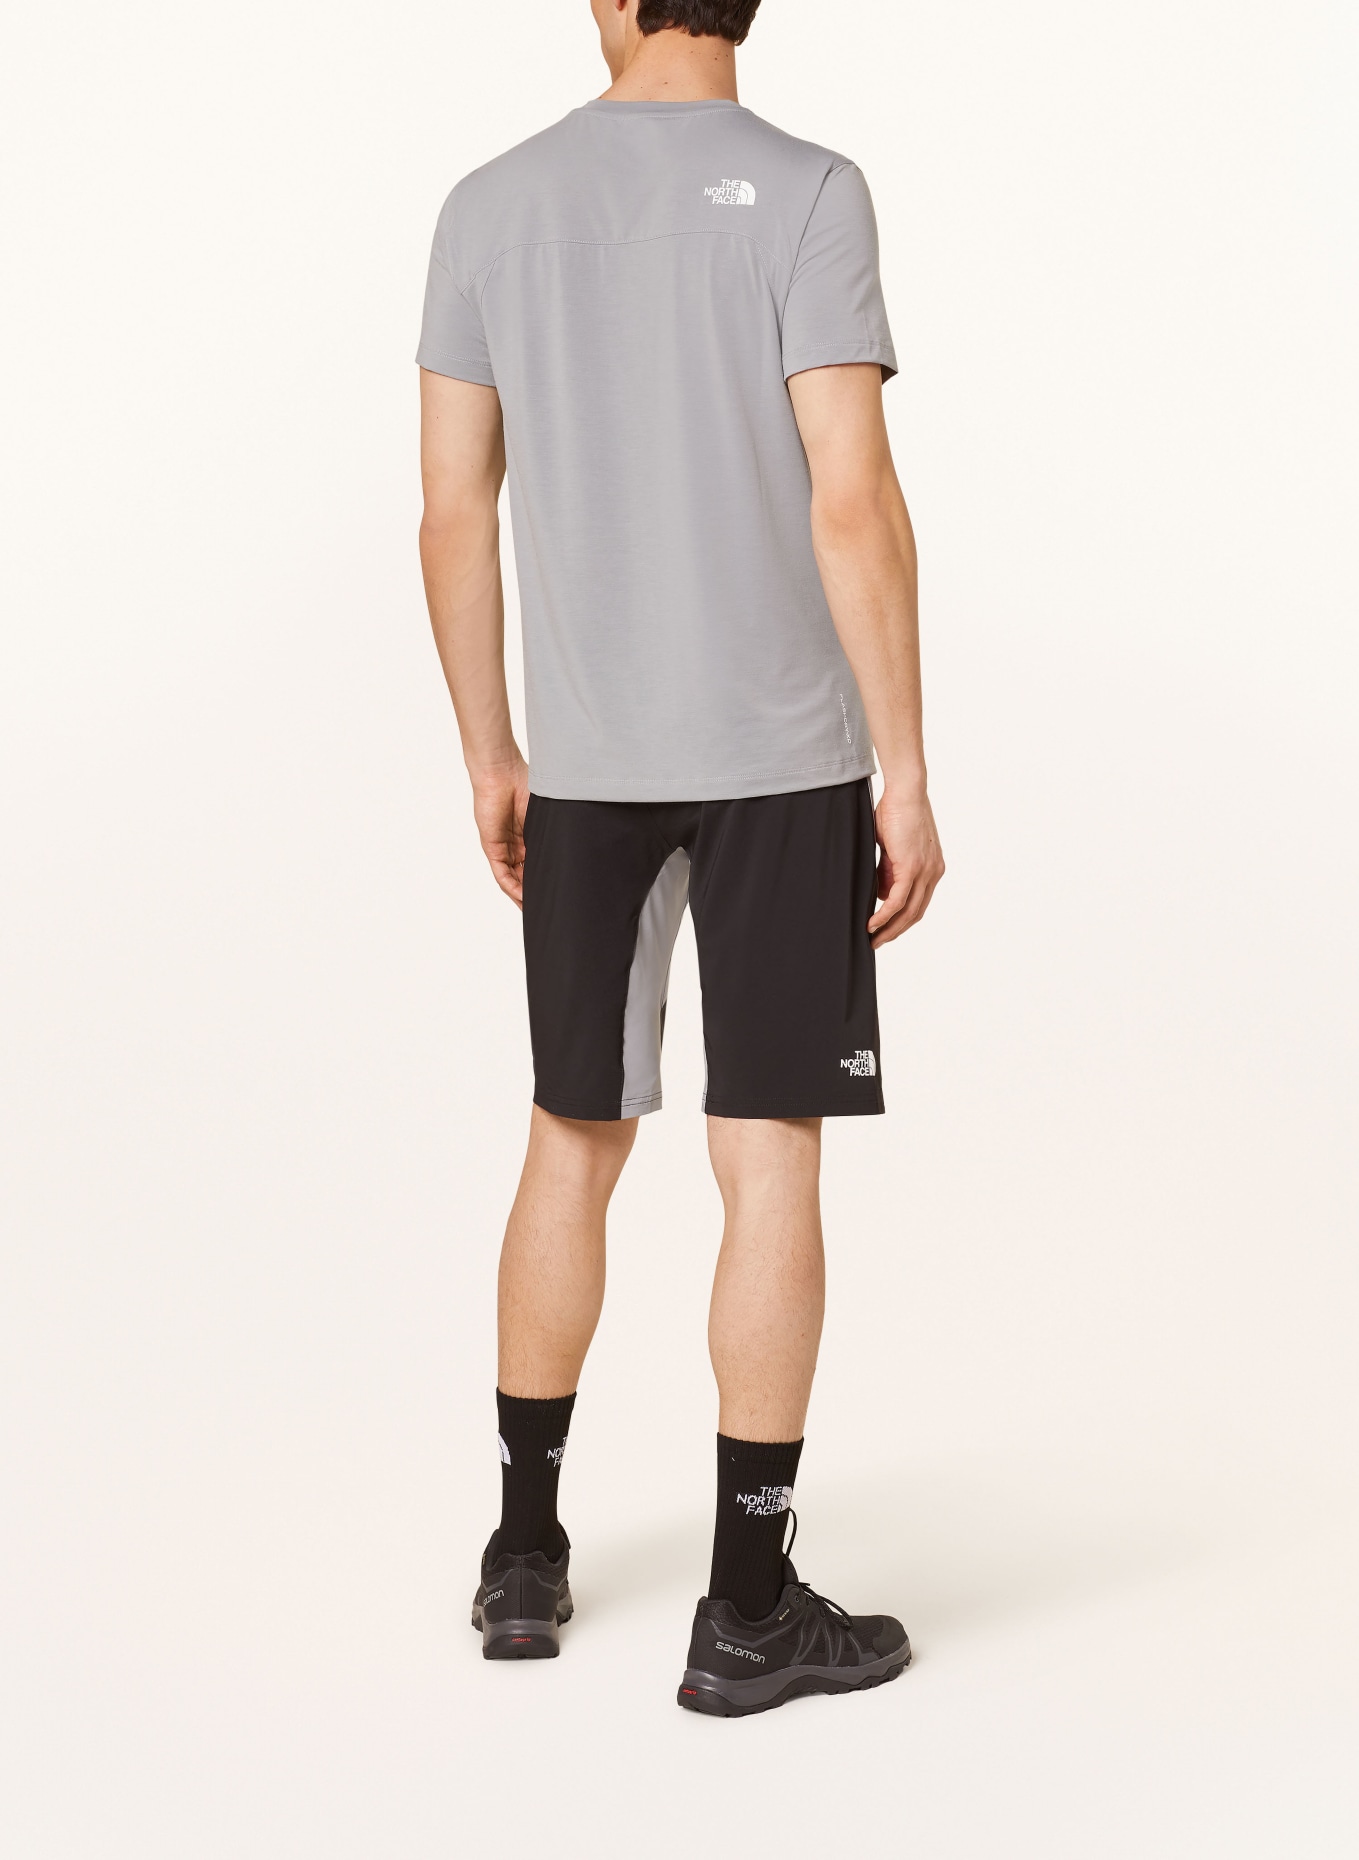 THE NORTH FACE T-shirt LIGHTNING ALPINE, Color: GRAY (Image 3)